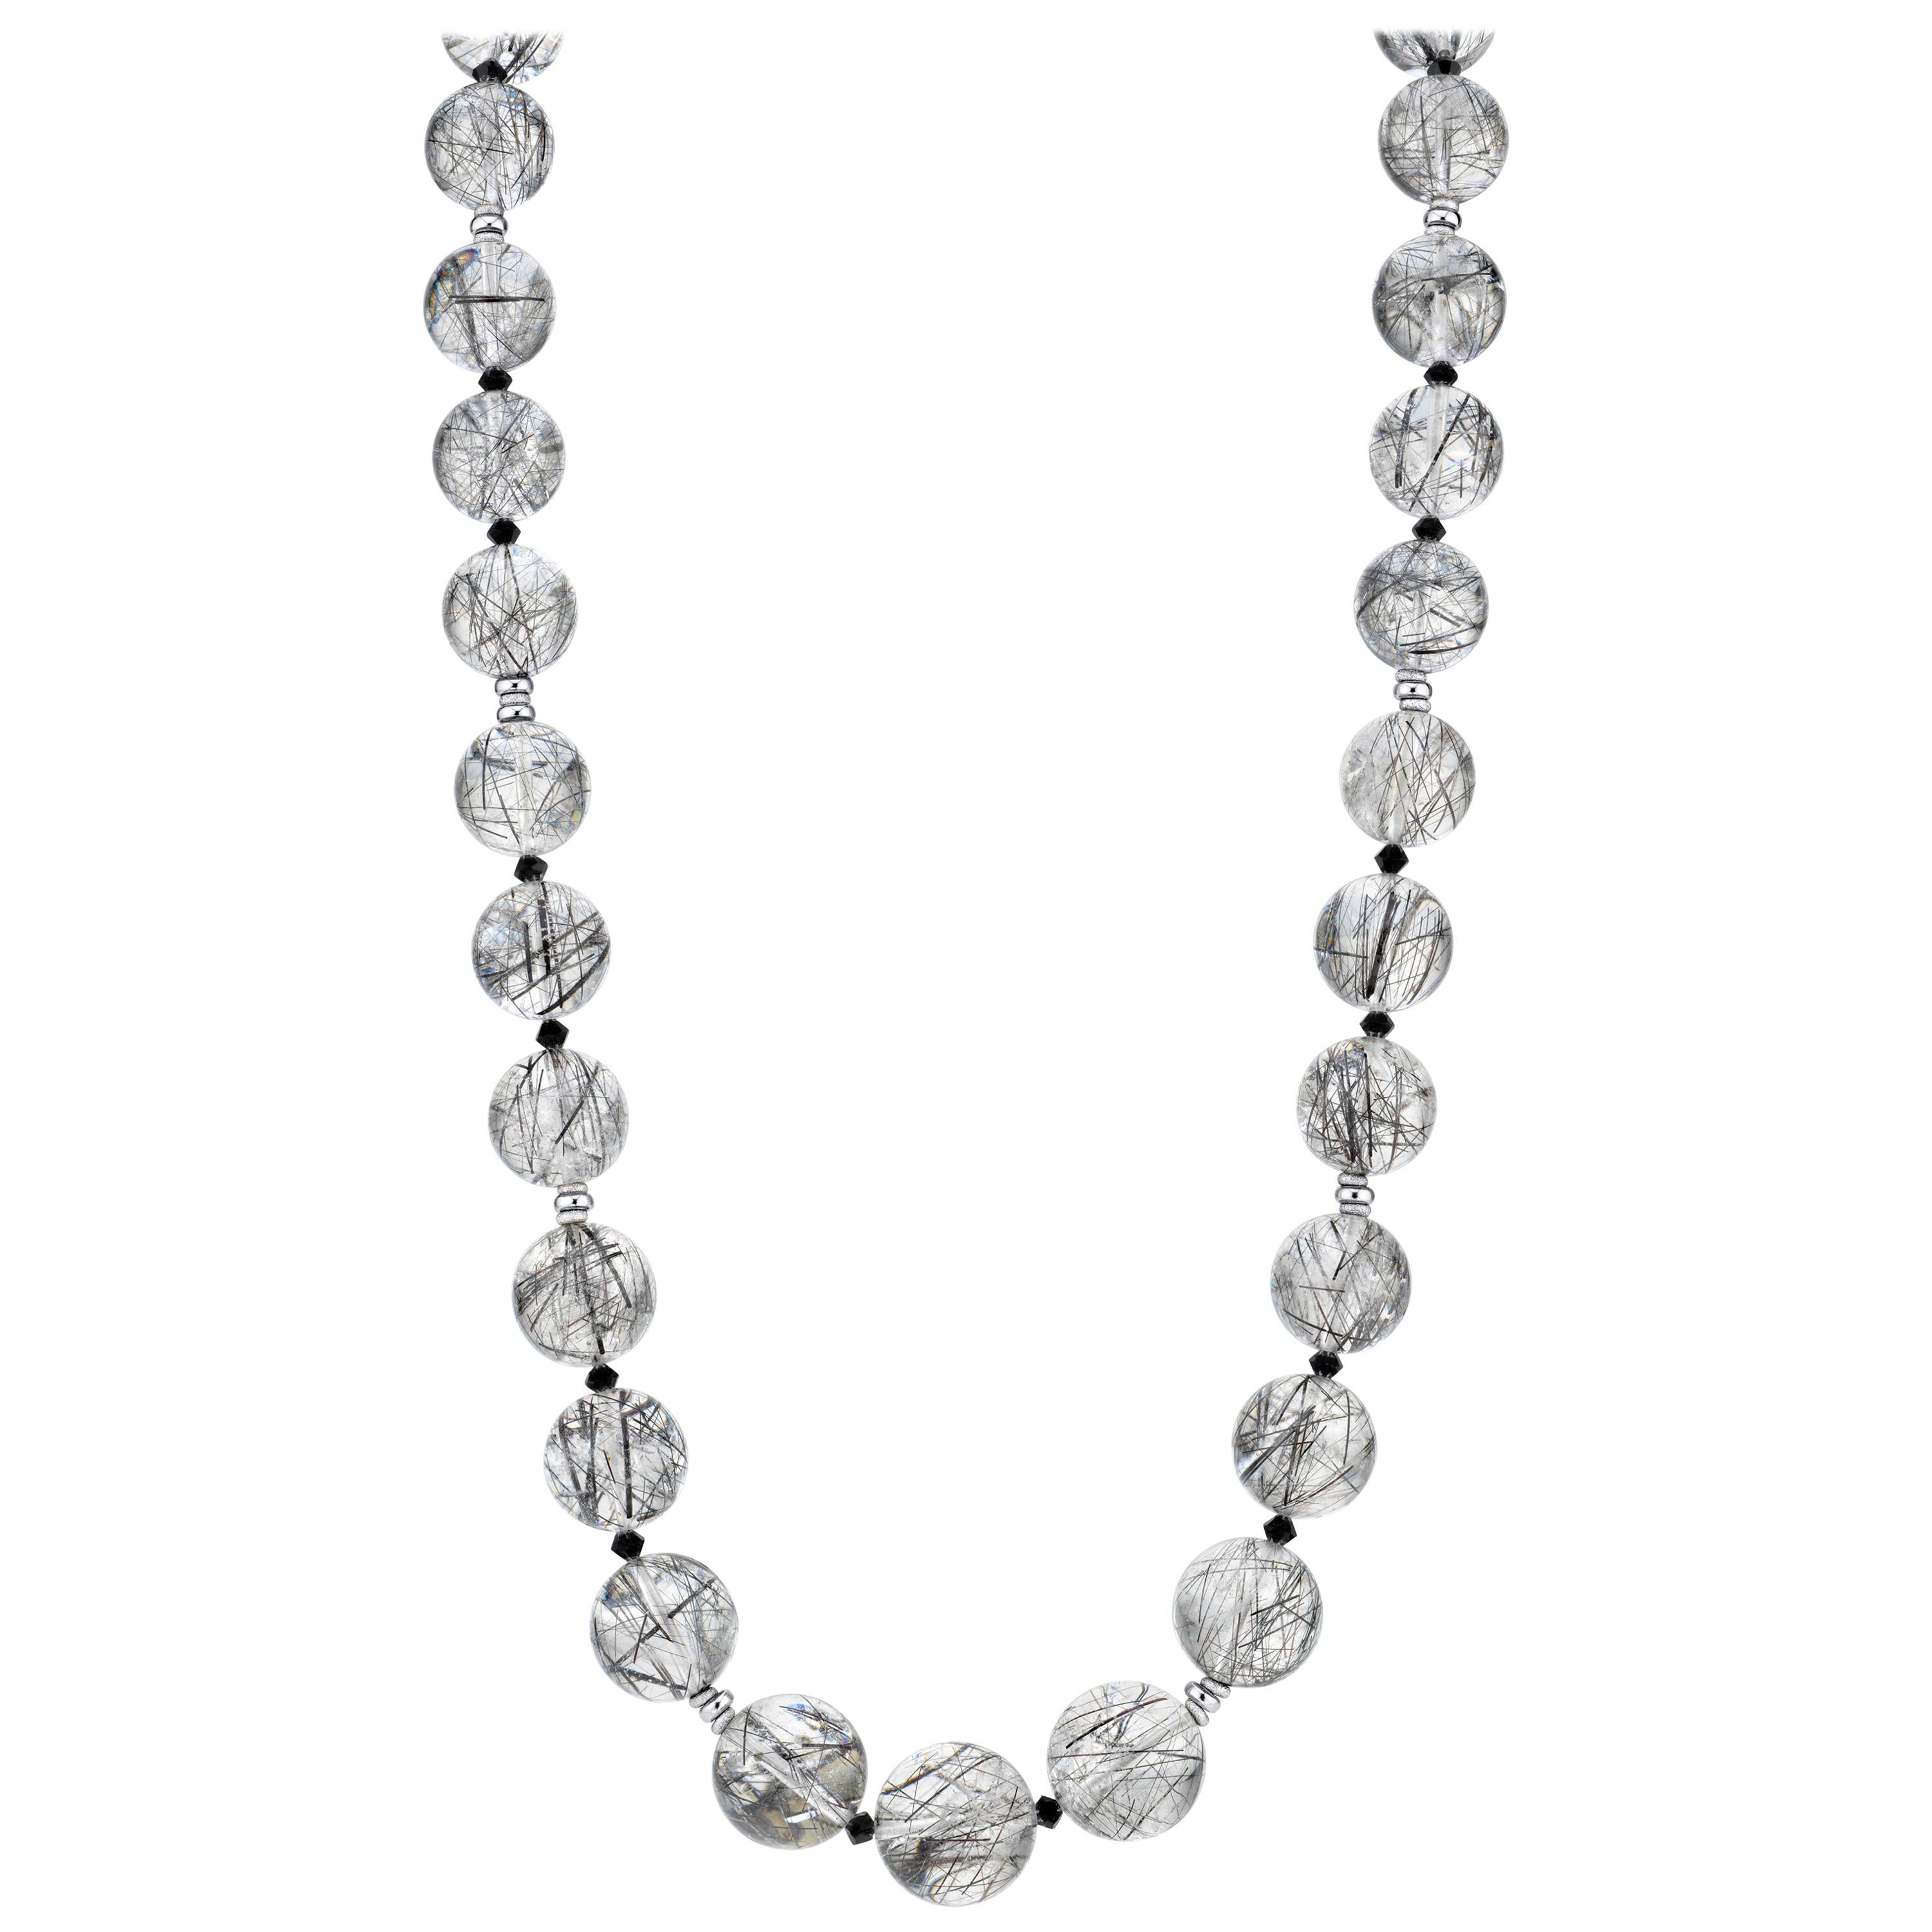 14-18mm Tourmalinated Quartz Bead Necklace with 14k White Gold Clasp and Spacers